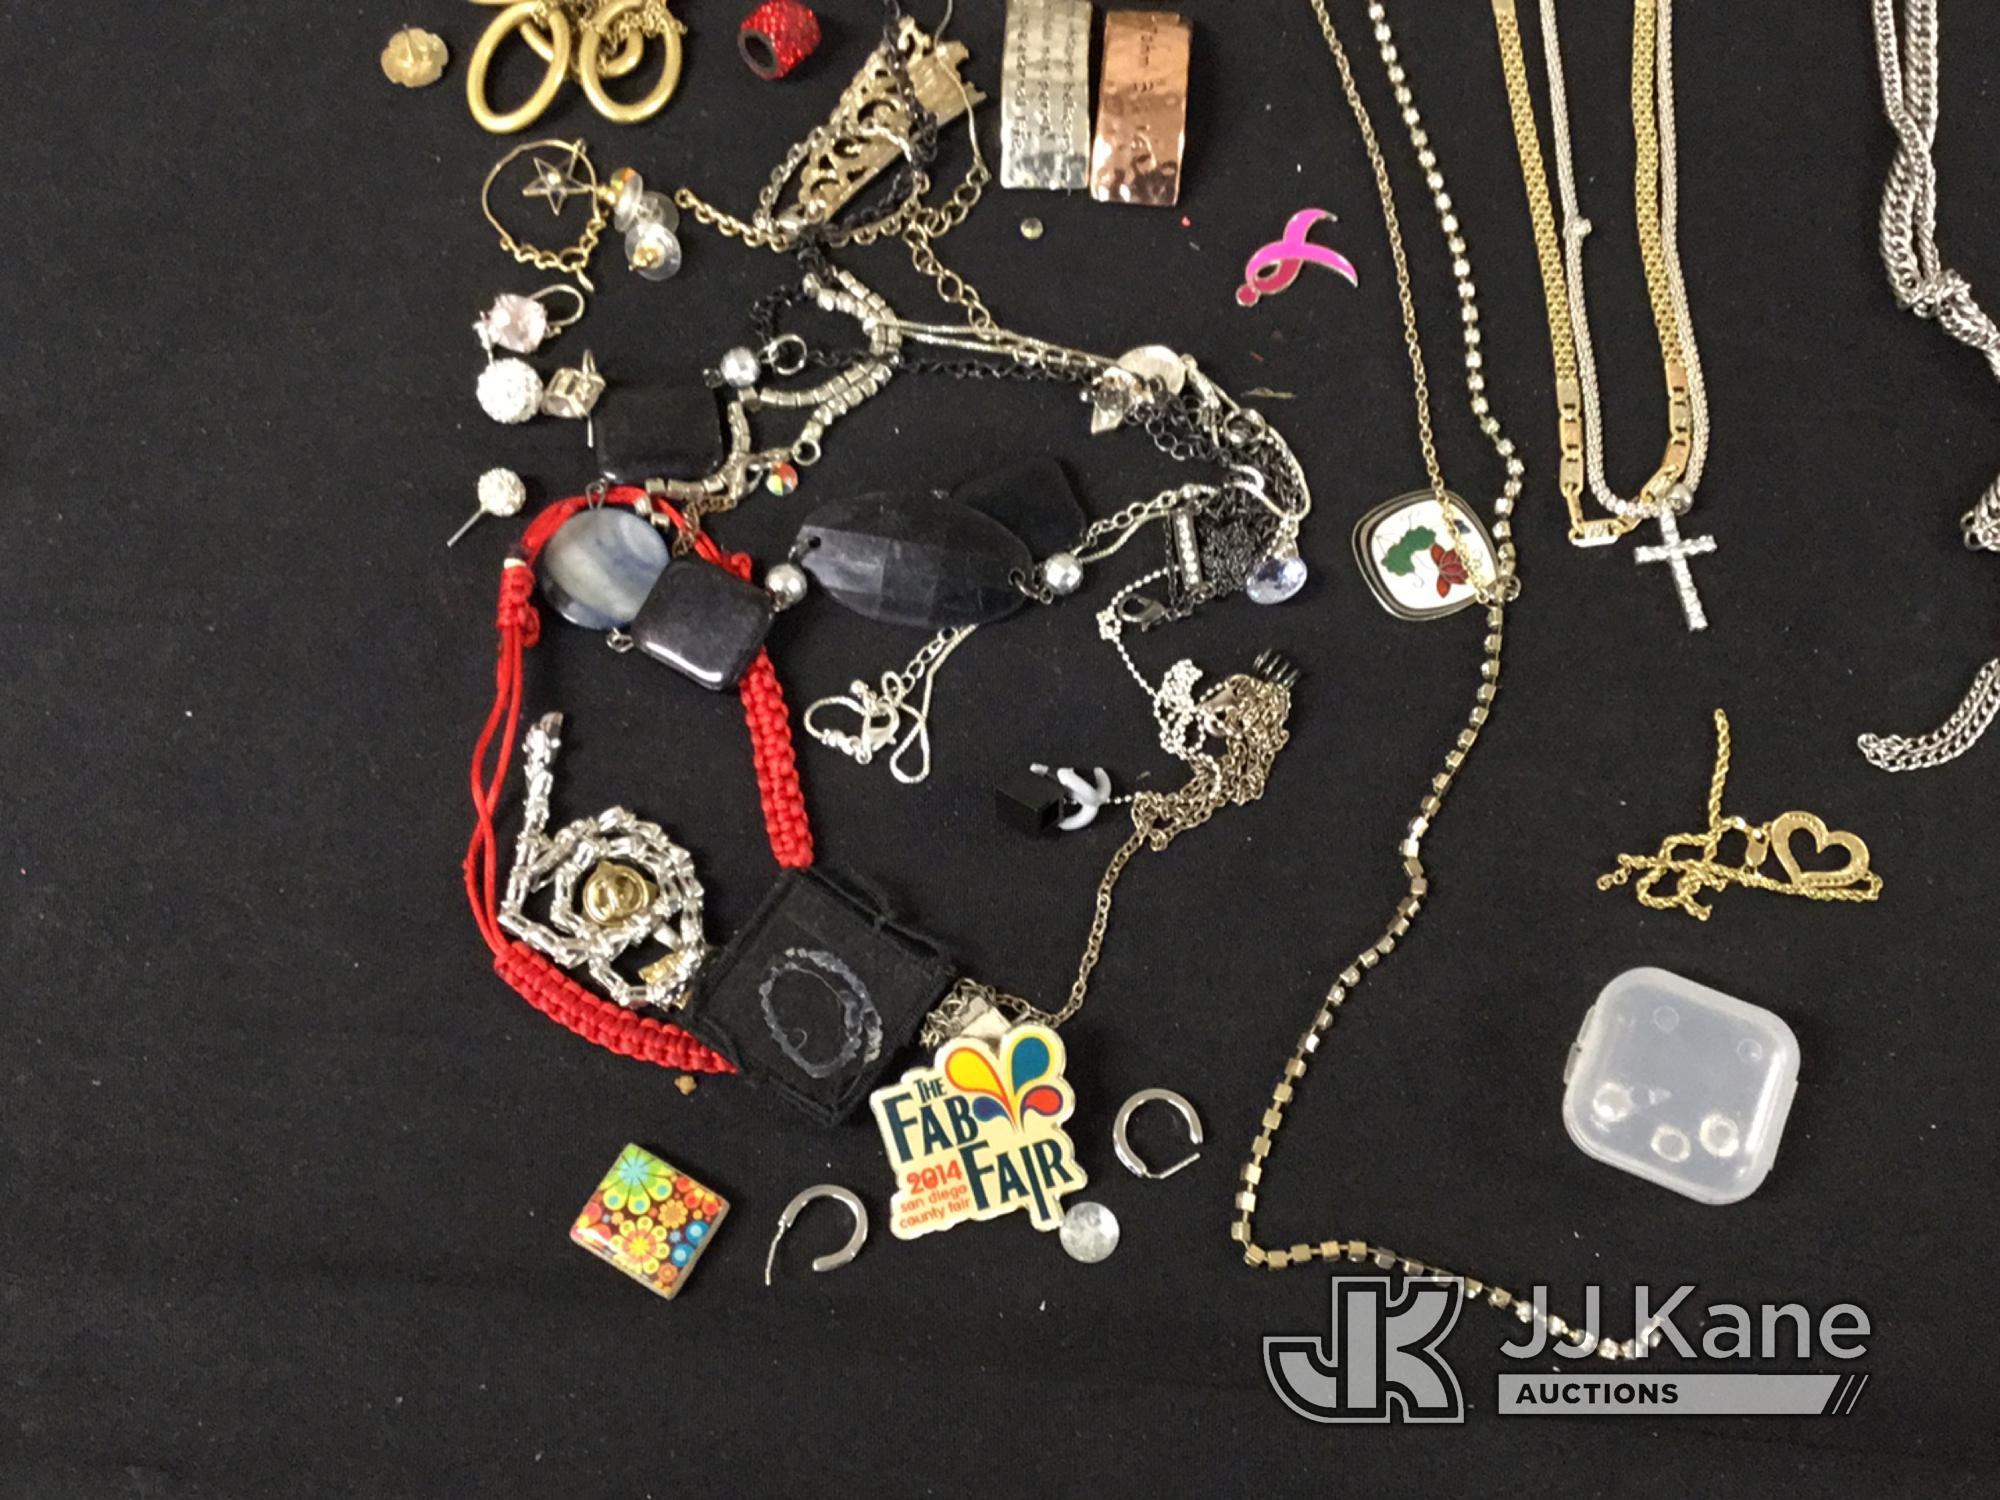 (Jurupa Valley, CA) Necklaces | possibly costume jewelry | authenticity unknown (Used) NOTE: This un